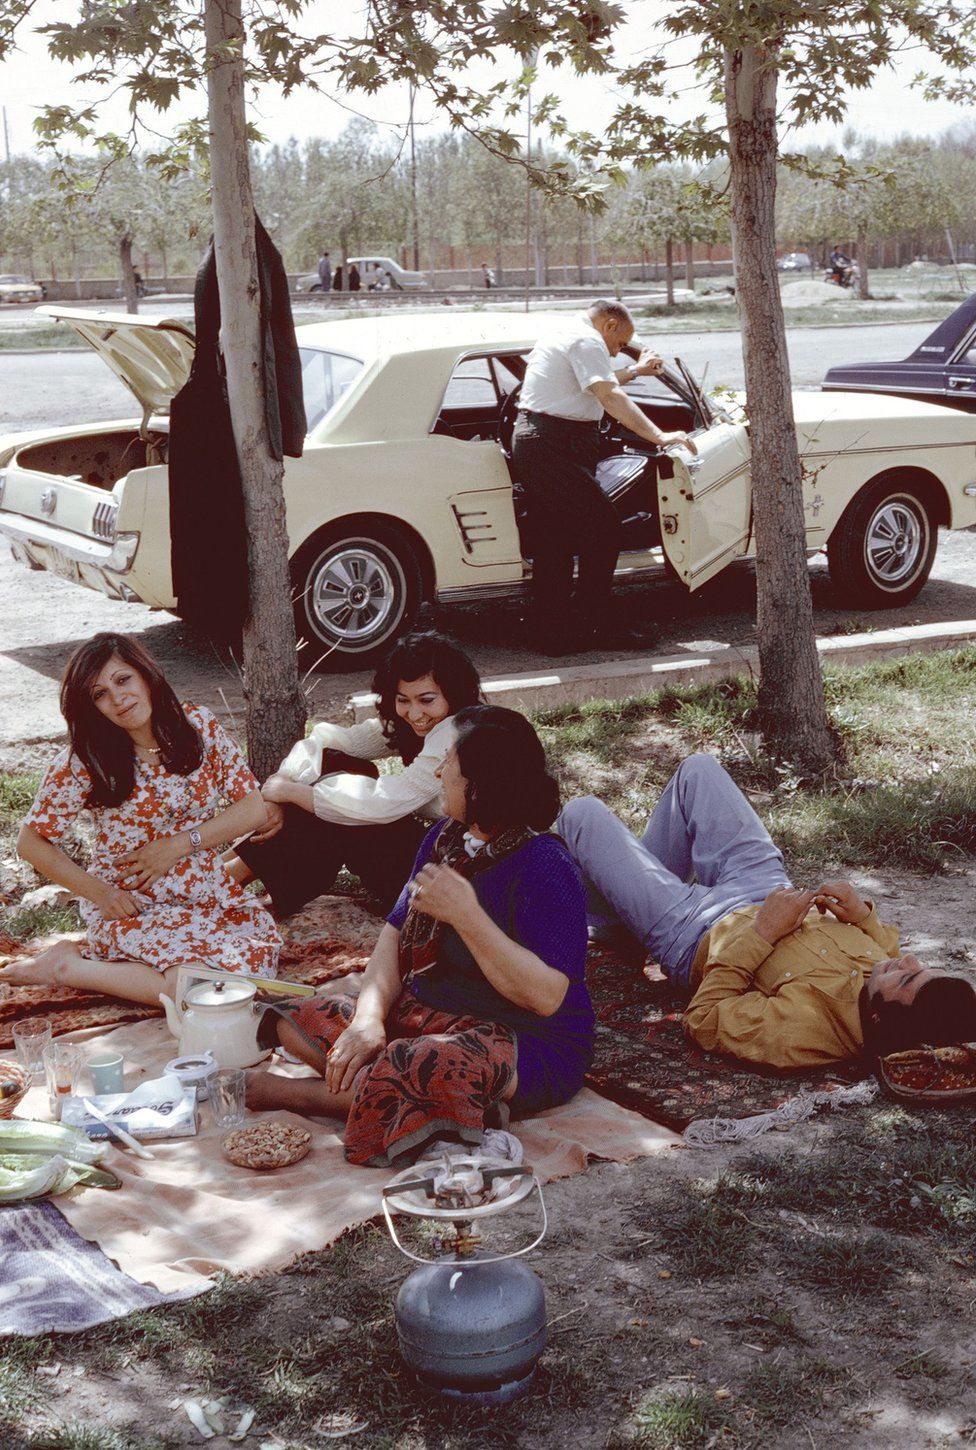 A group of men and women sit having a picnic in Tehran in 1976